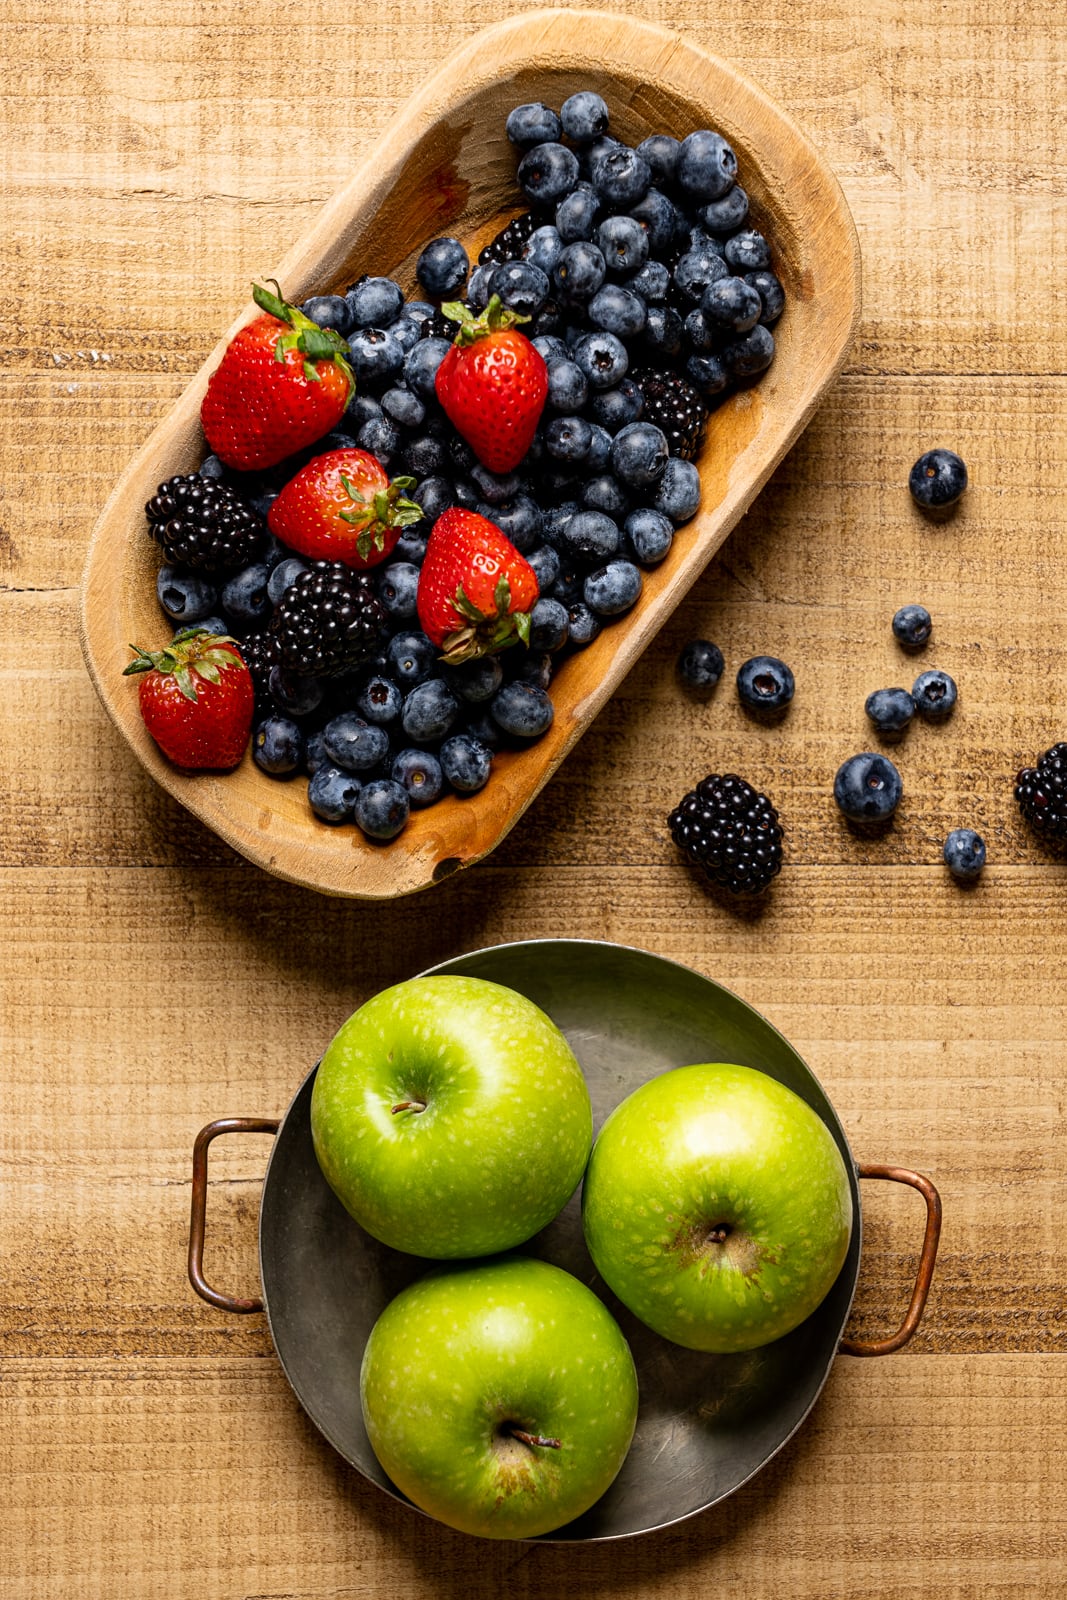 Bowls with fresh berries and green apples on a brown wood table.